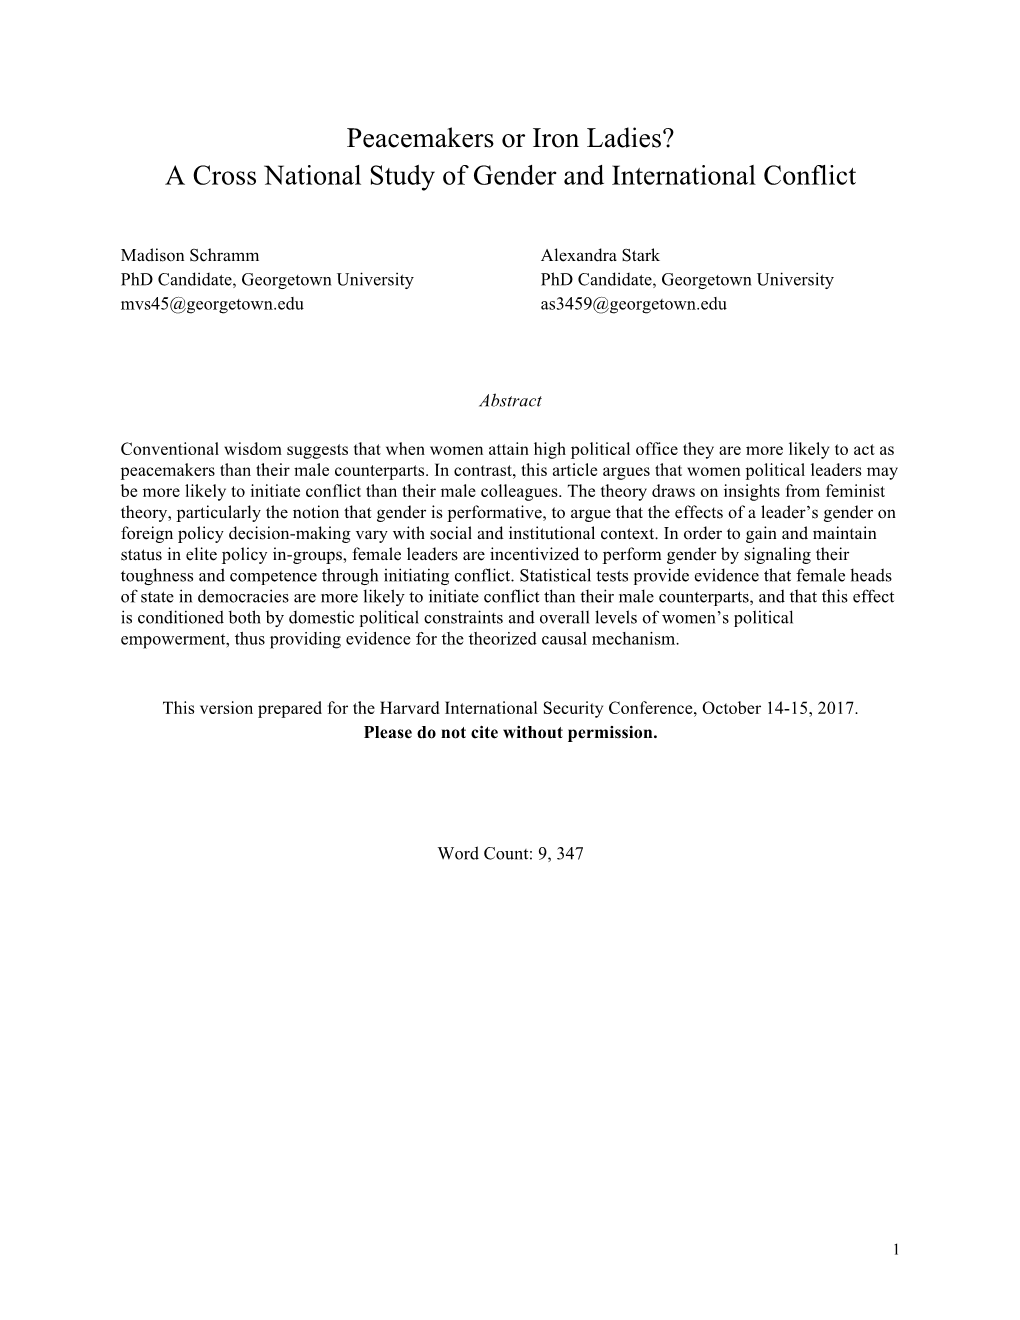 Peacemakers Or Iron Ladies? a Cross National Study of Gender and International Conflict